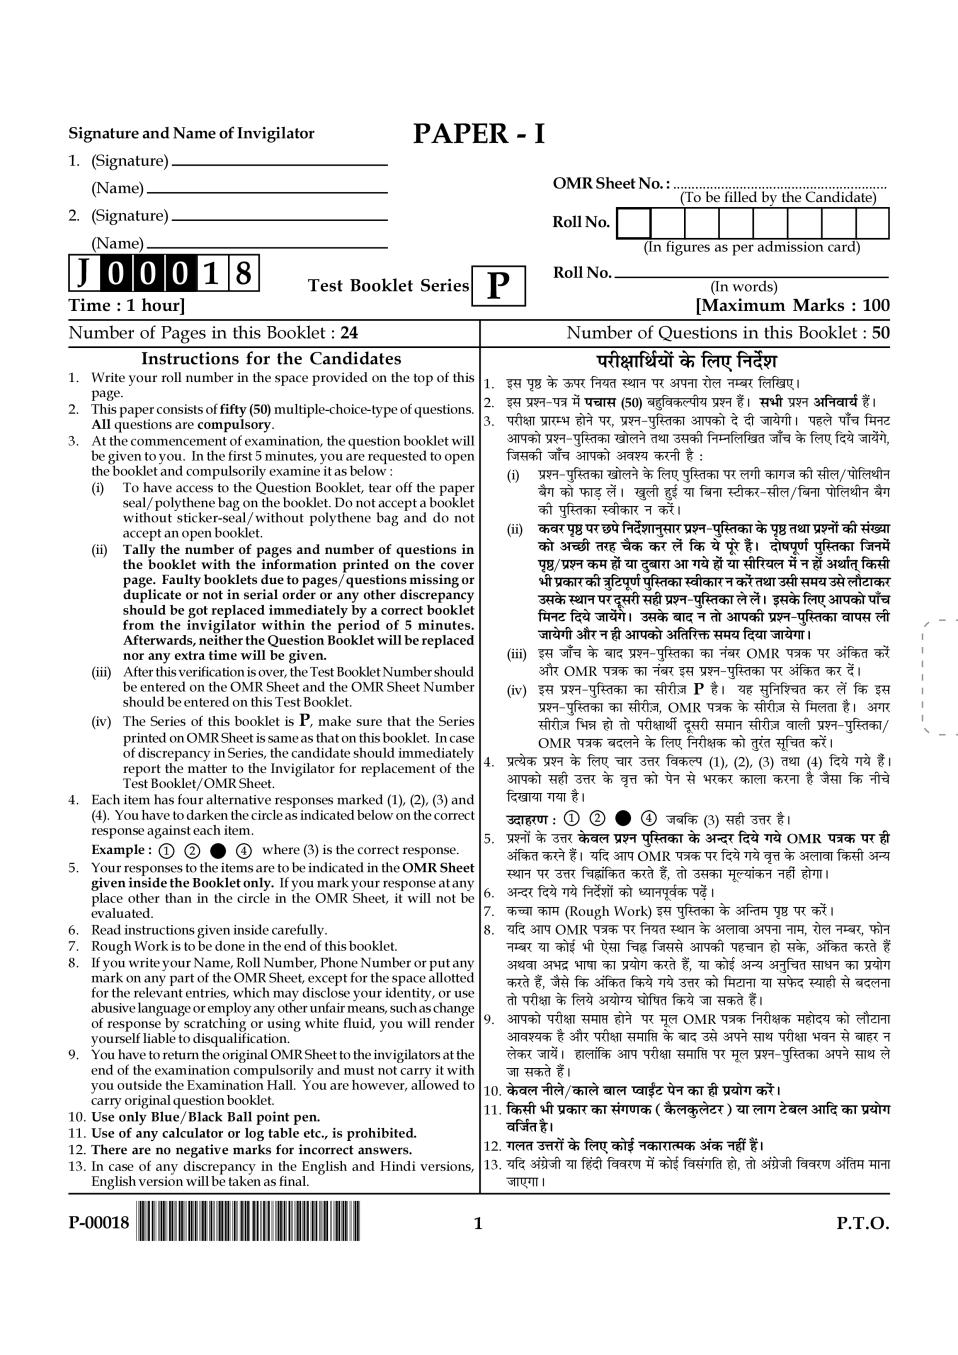 UGC NET Question Paper 2018 (Paper 1) in Hindi - Page 1